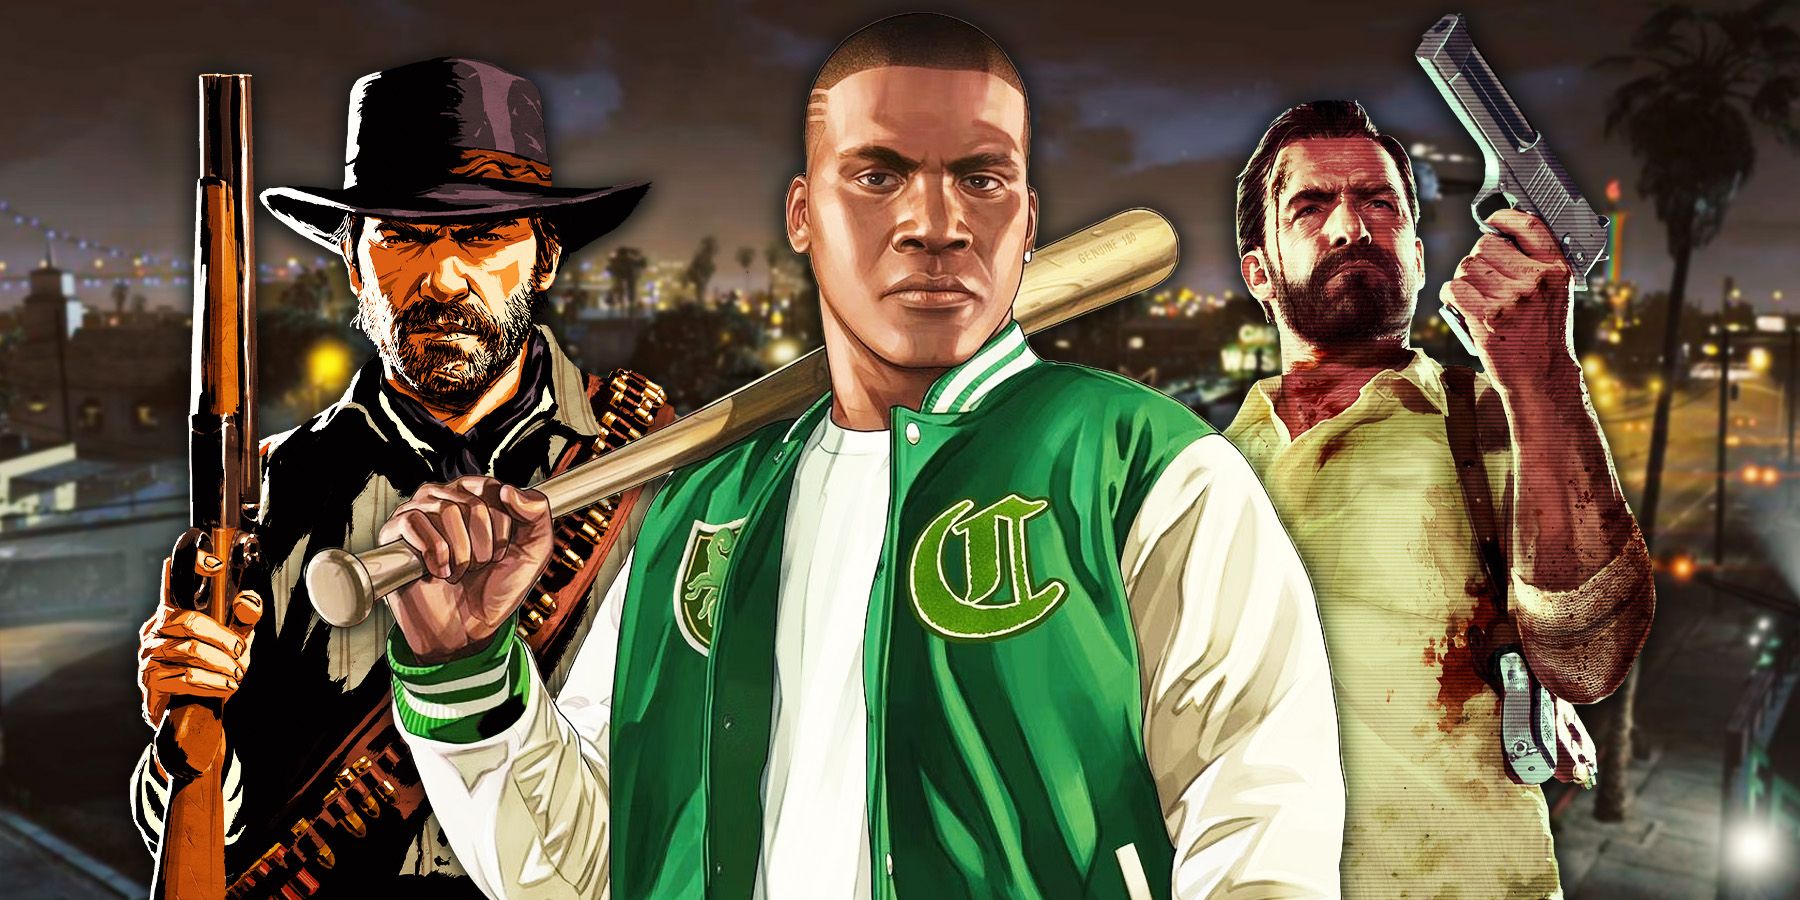 Rockstar Confirms GTA VI Is In The Works; Here's Recalling Grand Theft Auto  Series, Red Dead, Max Payne And Other Popular Games - News18